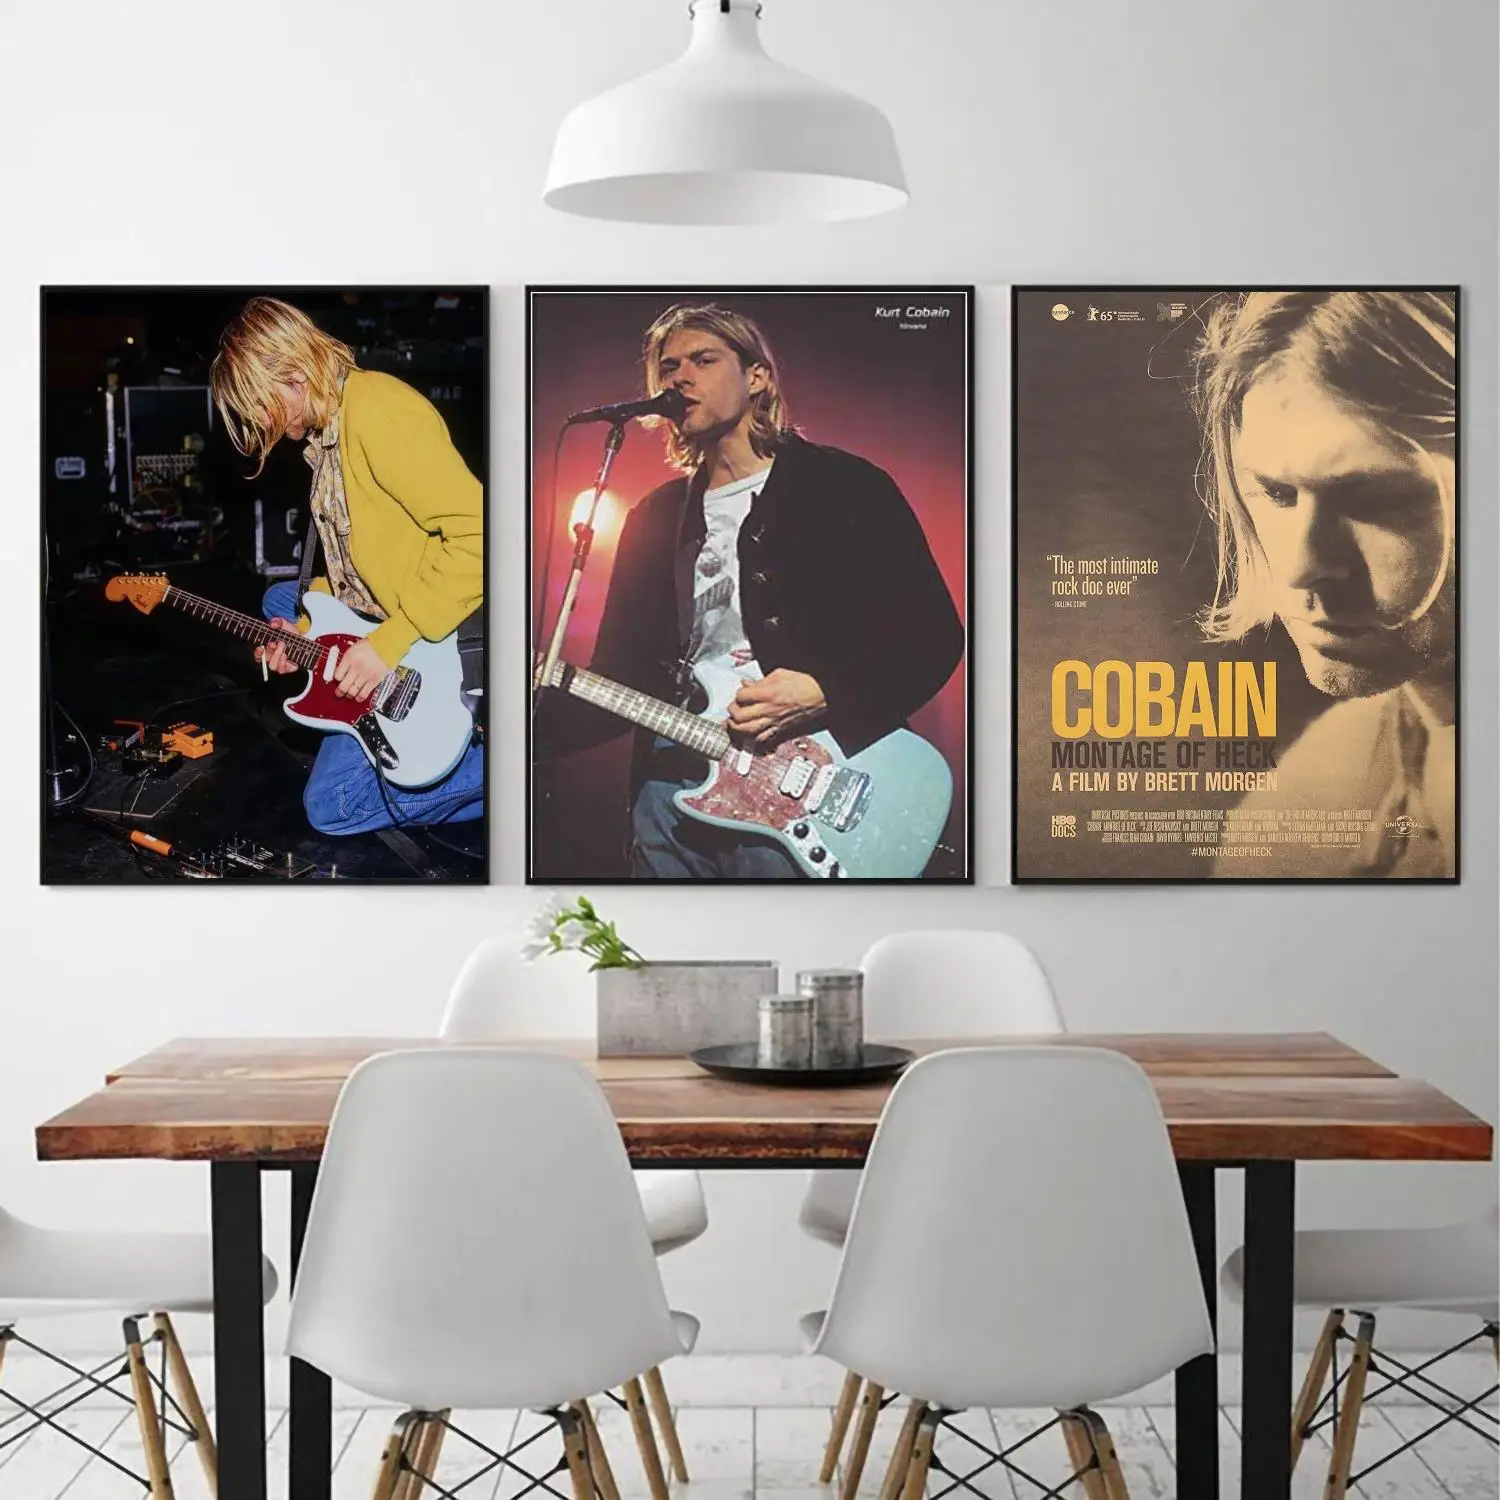 

kirk cobain poster 24x36 Wall Art Canvas Posters Decoration Art Poster Personalized Gift Modern Family bedroom Painting